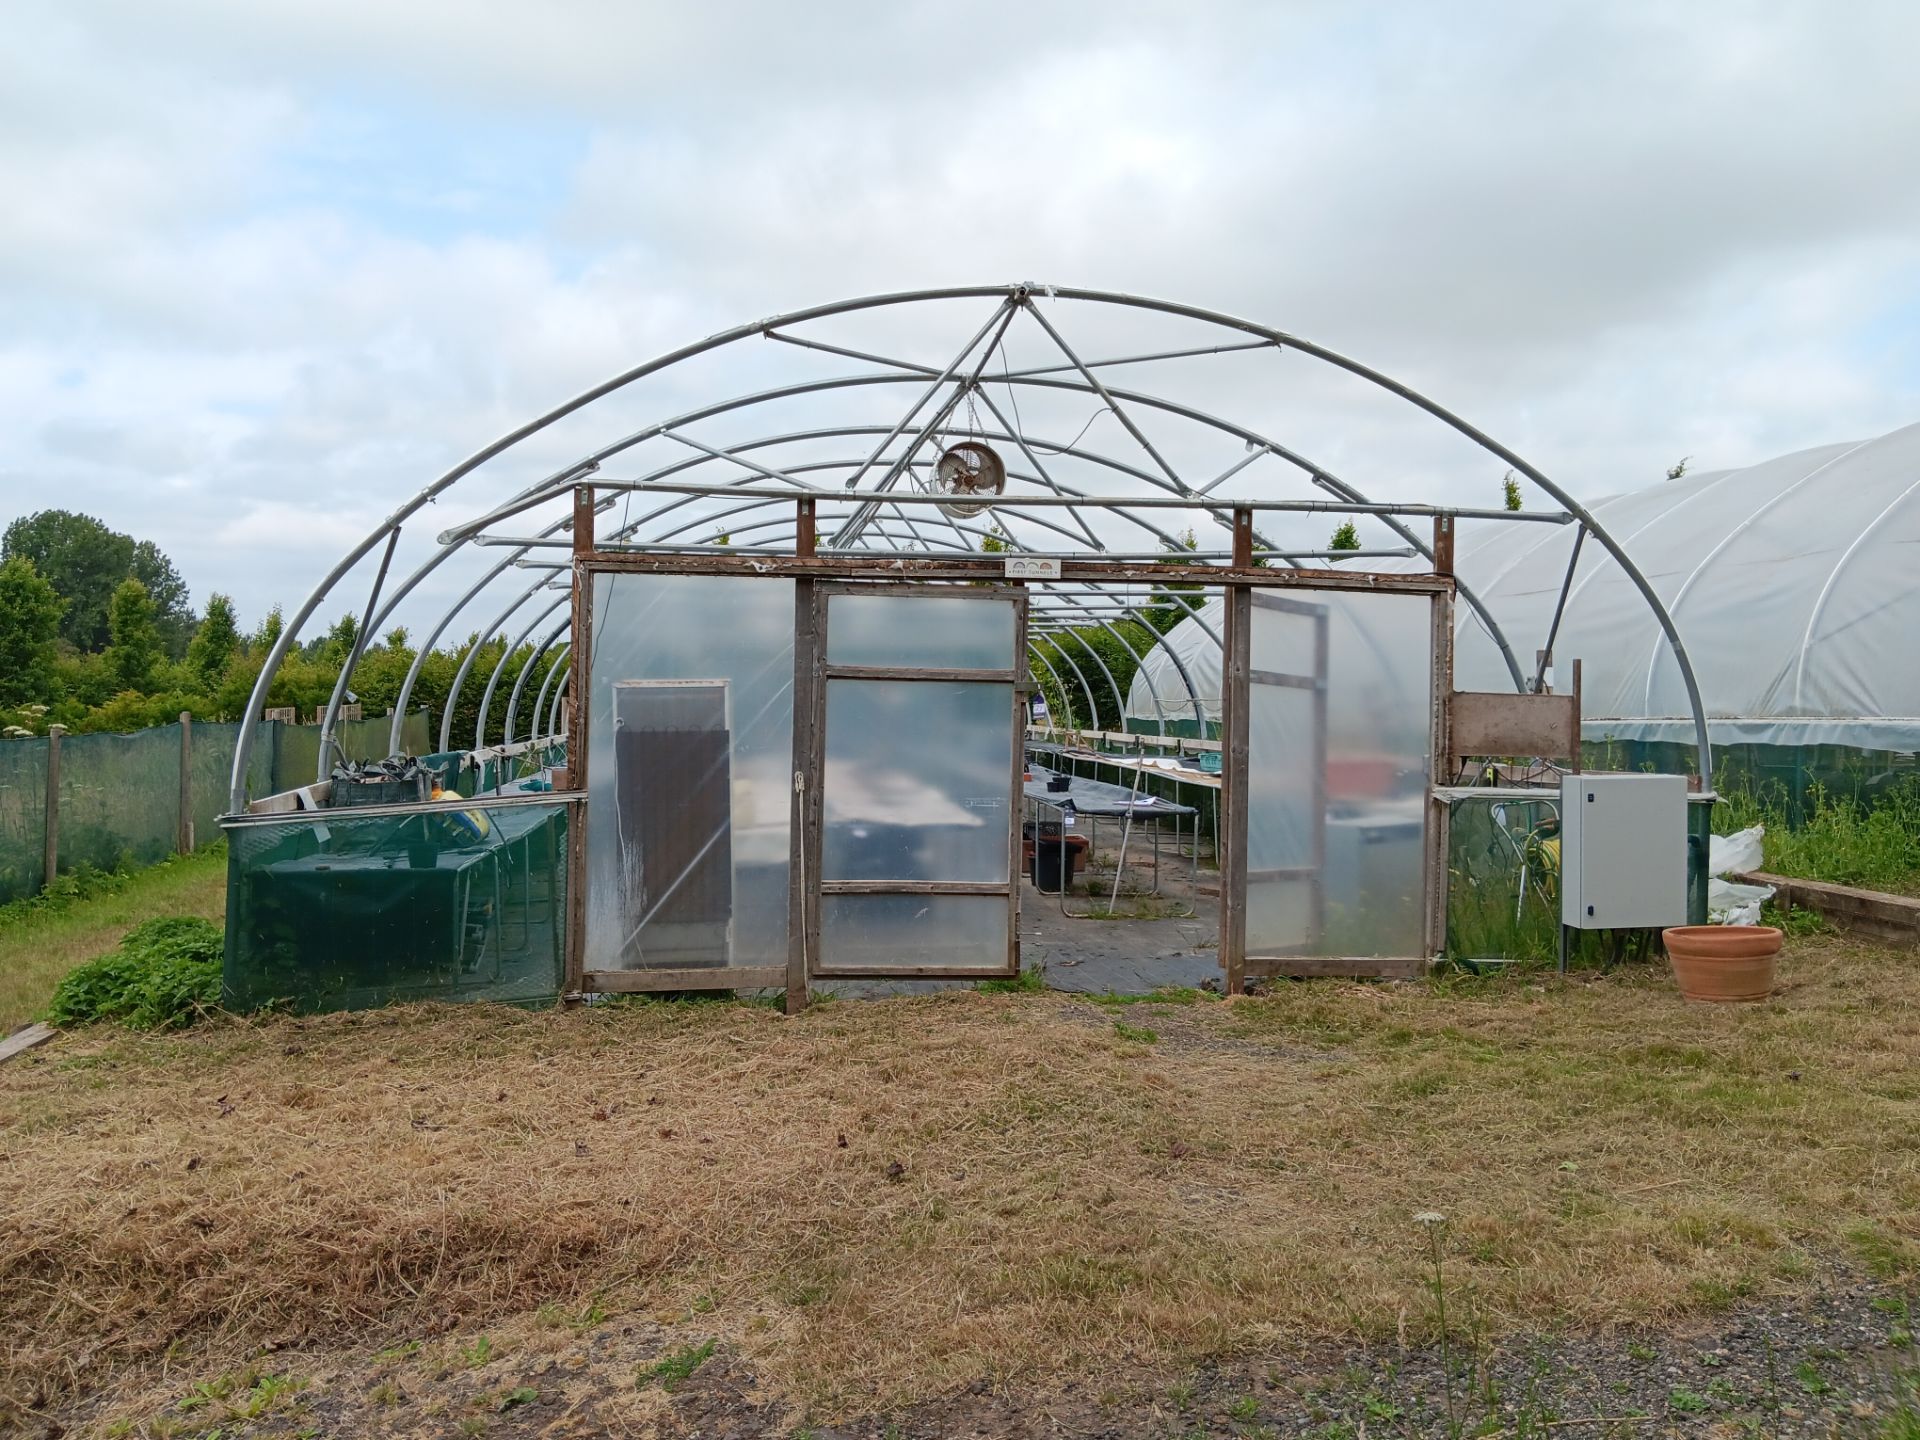 Galvanised steel framed poly tunnel, approx. 20 x 8m with fitted Wright Rain Macpenny mist control - Image 3 of 6